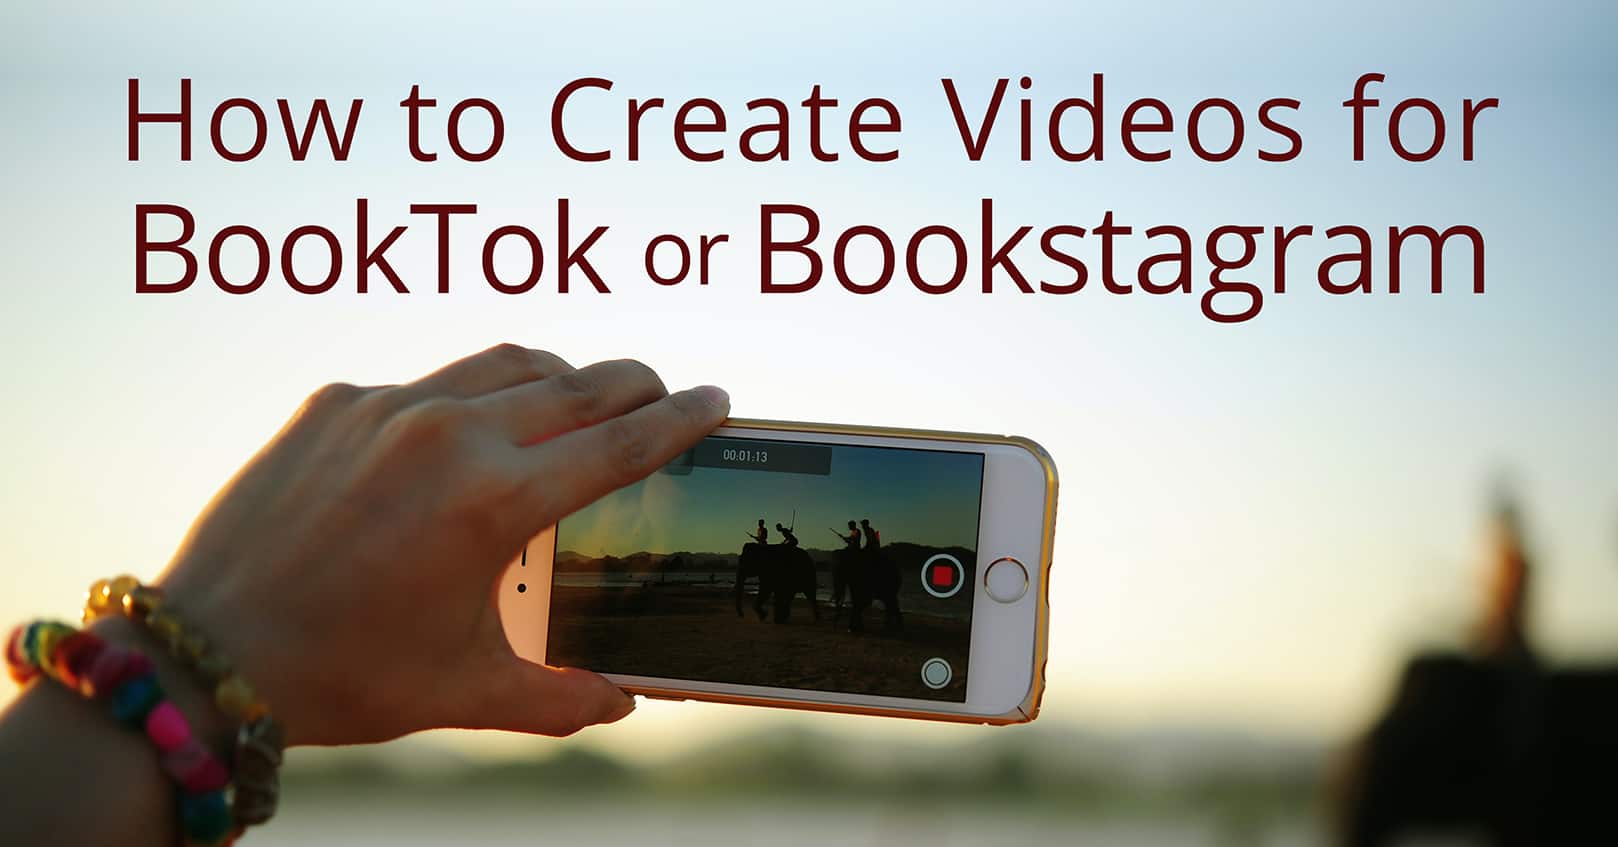 How to Create Videos for BookTok or Bookstagram